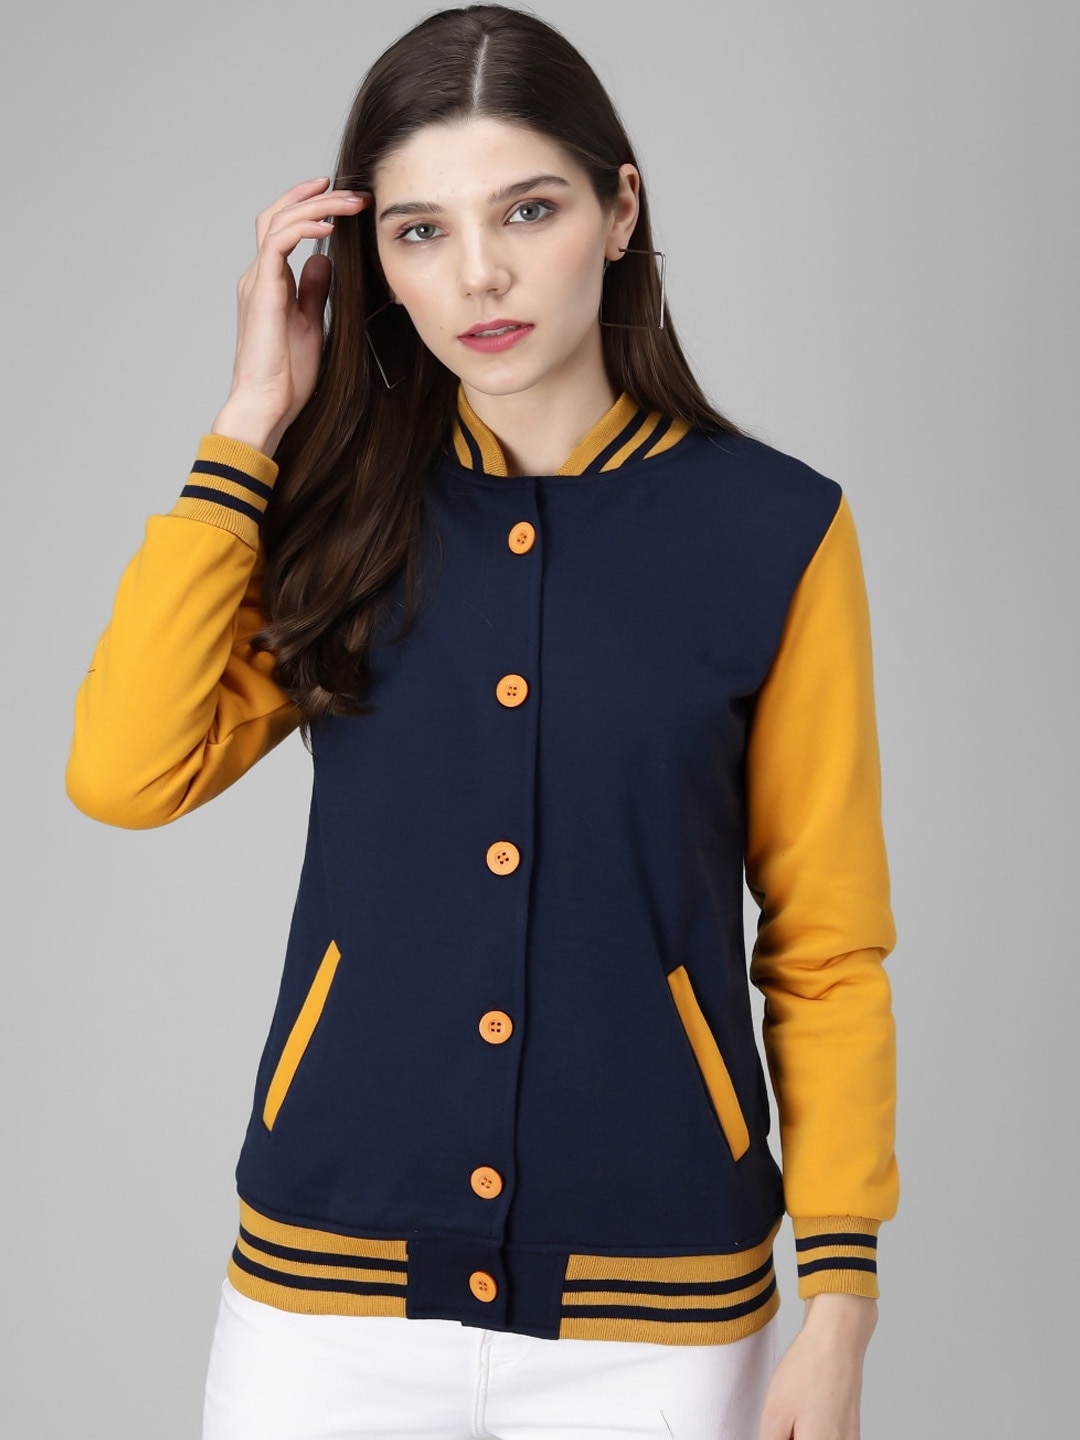 Darzi Women Navy Blue Colourblocked Fleece Bomber with Embroidered Jacket Price in India